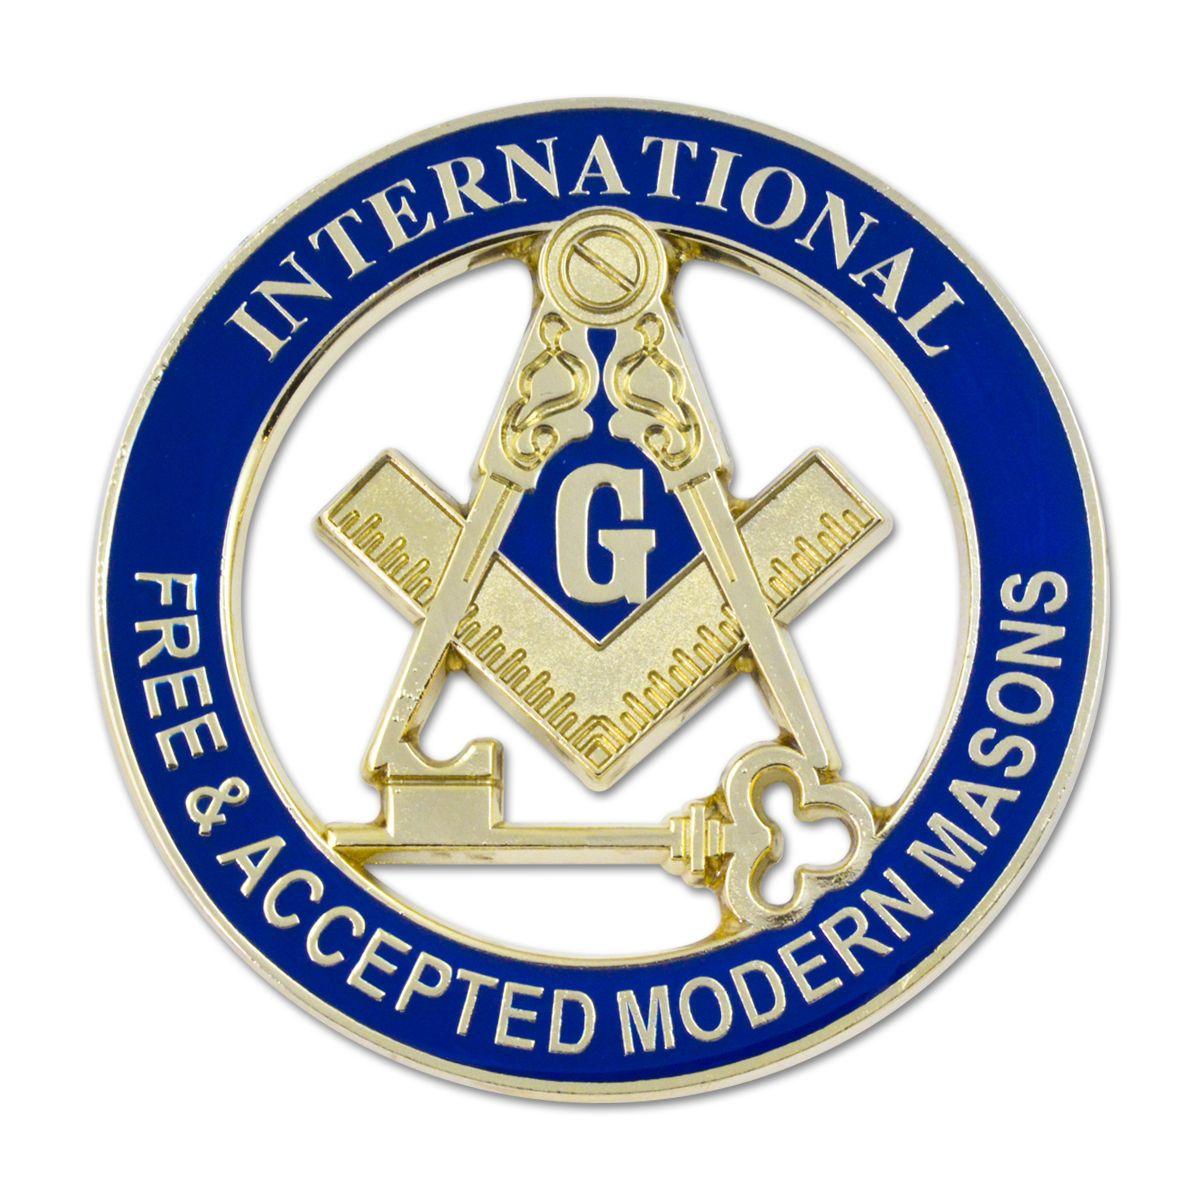 Round Blue Logo - International Free & Accepted Modern Masons Round Blue and Gold ...